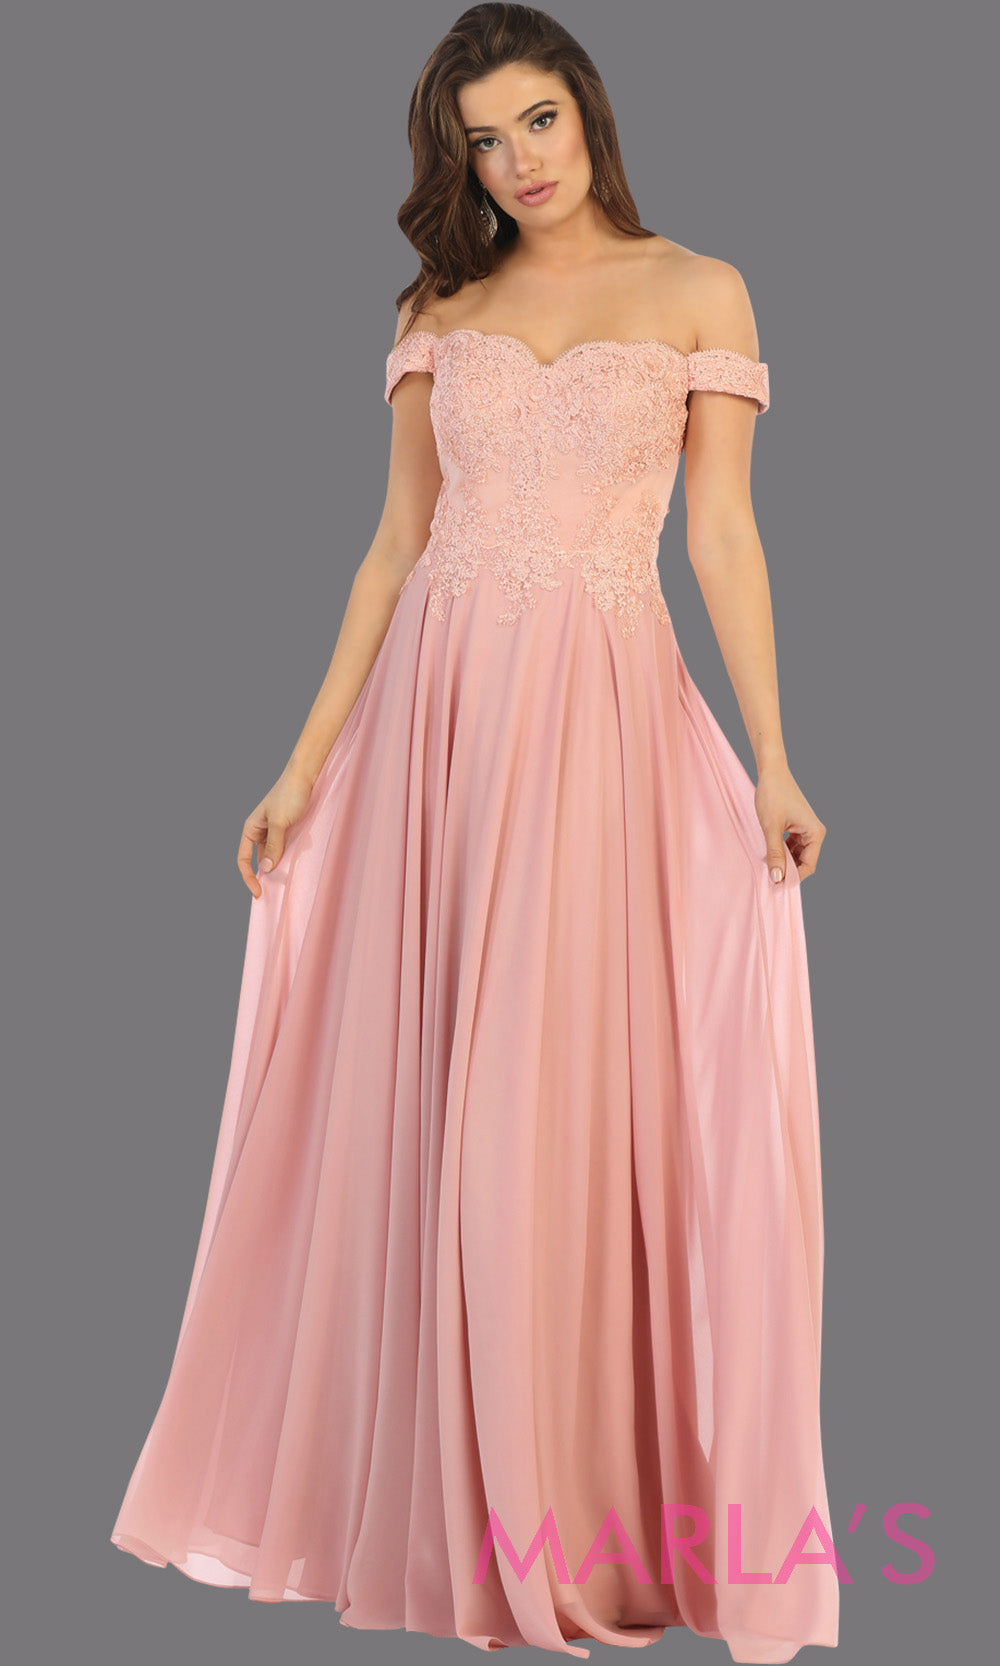 Long flowy blush pink off shoulder dress with lace top from mayqueen. Light pink evening gown is perfect for bridesmaids, simple wedding guest dress, formal party,plus size wedding guest dress,modest gown,indowestern gown, mother of the bride